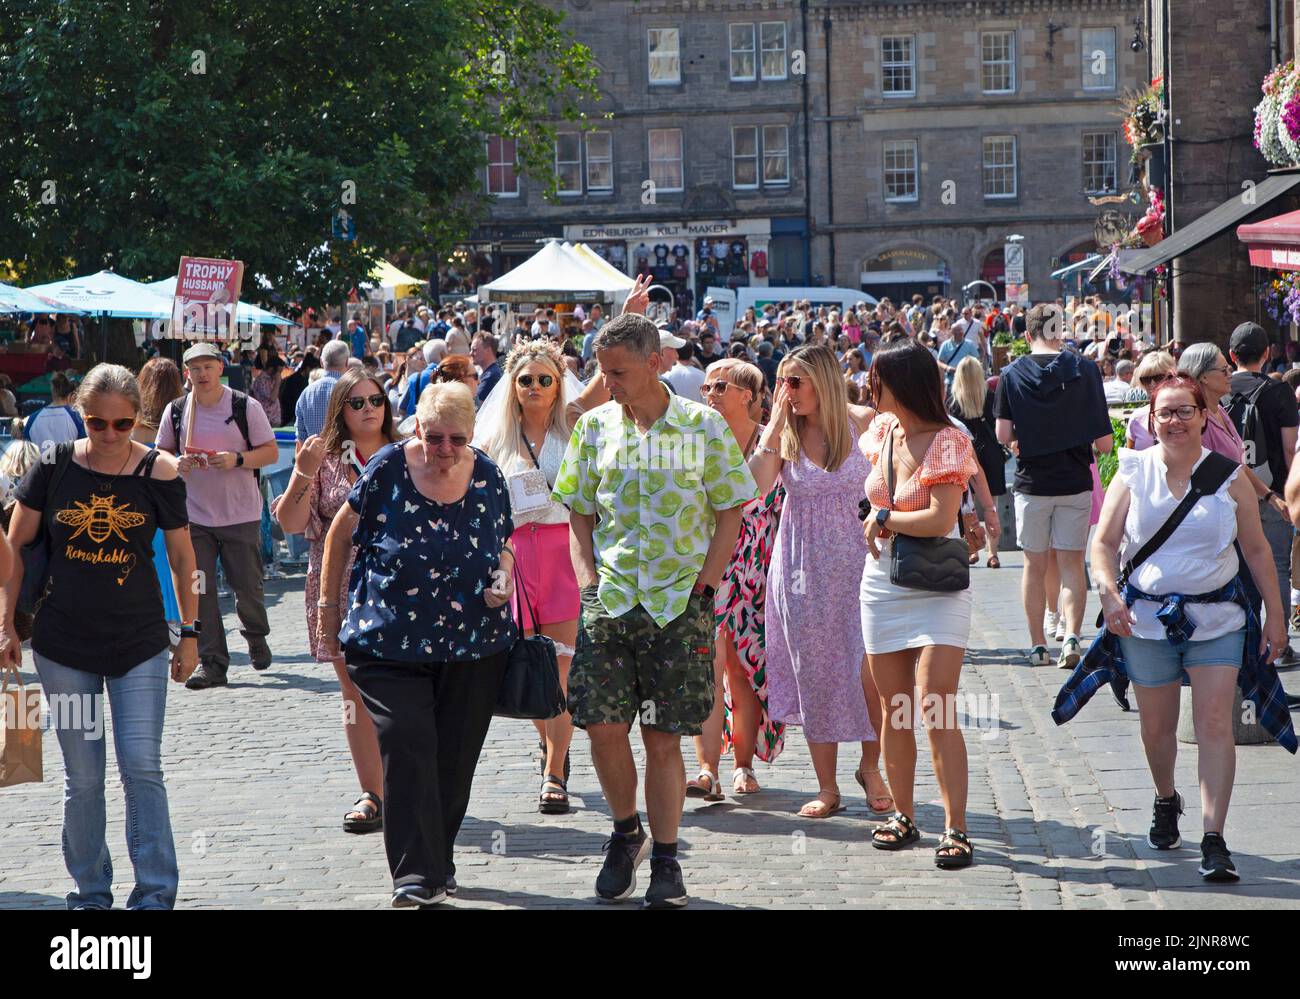 Edinburgh city centre, Scotland, UK. 13th August 2022. 9th Day for the Edinburgh Festival Fringe and the Film and Book festival also began this weekend so very busy with visitors enjoying the temperature of 22 degrees centigrade befor the haar arrived from the east coast mid afternoon. Pictured: A busy Grassmrket. Credit: ArchWhite/alamy live news. Stock Photo